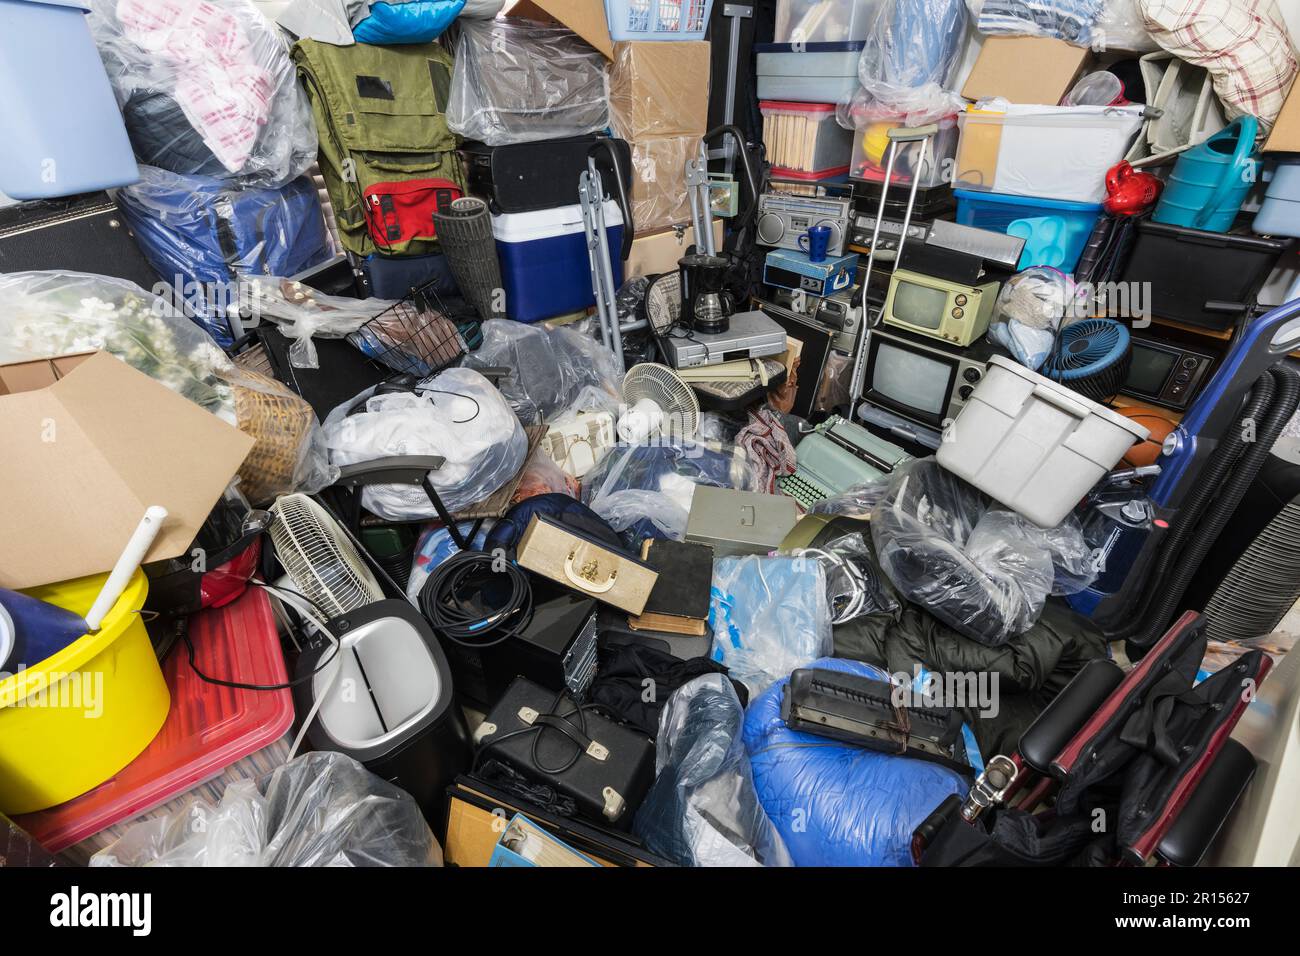 Hoarder house packed with clothing bags, household objects, vintage electronics and miscellaneous junk. Stock Photo